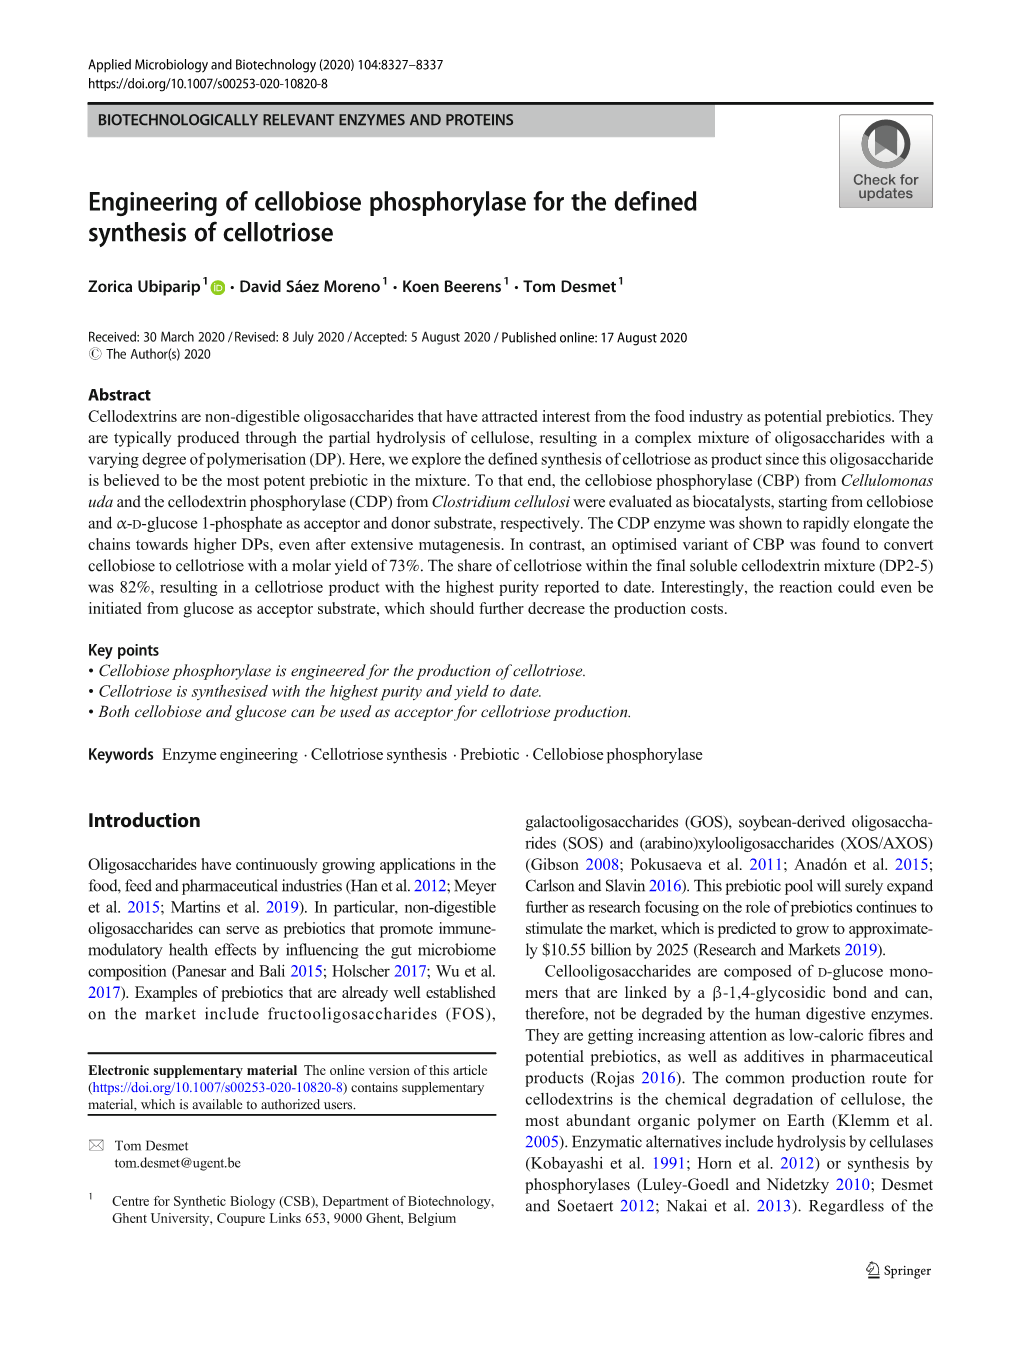 Engineering of Cellobiose Phosphorylase for the Defined Synthesis of Cellotriose